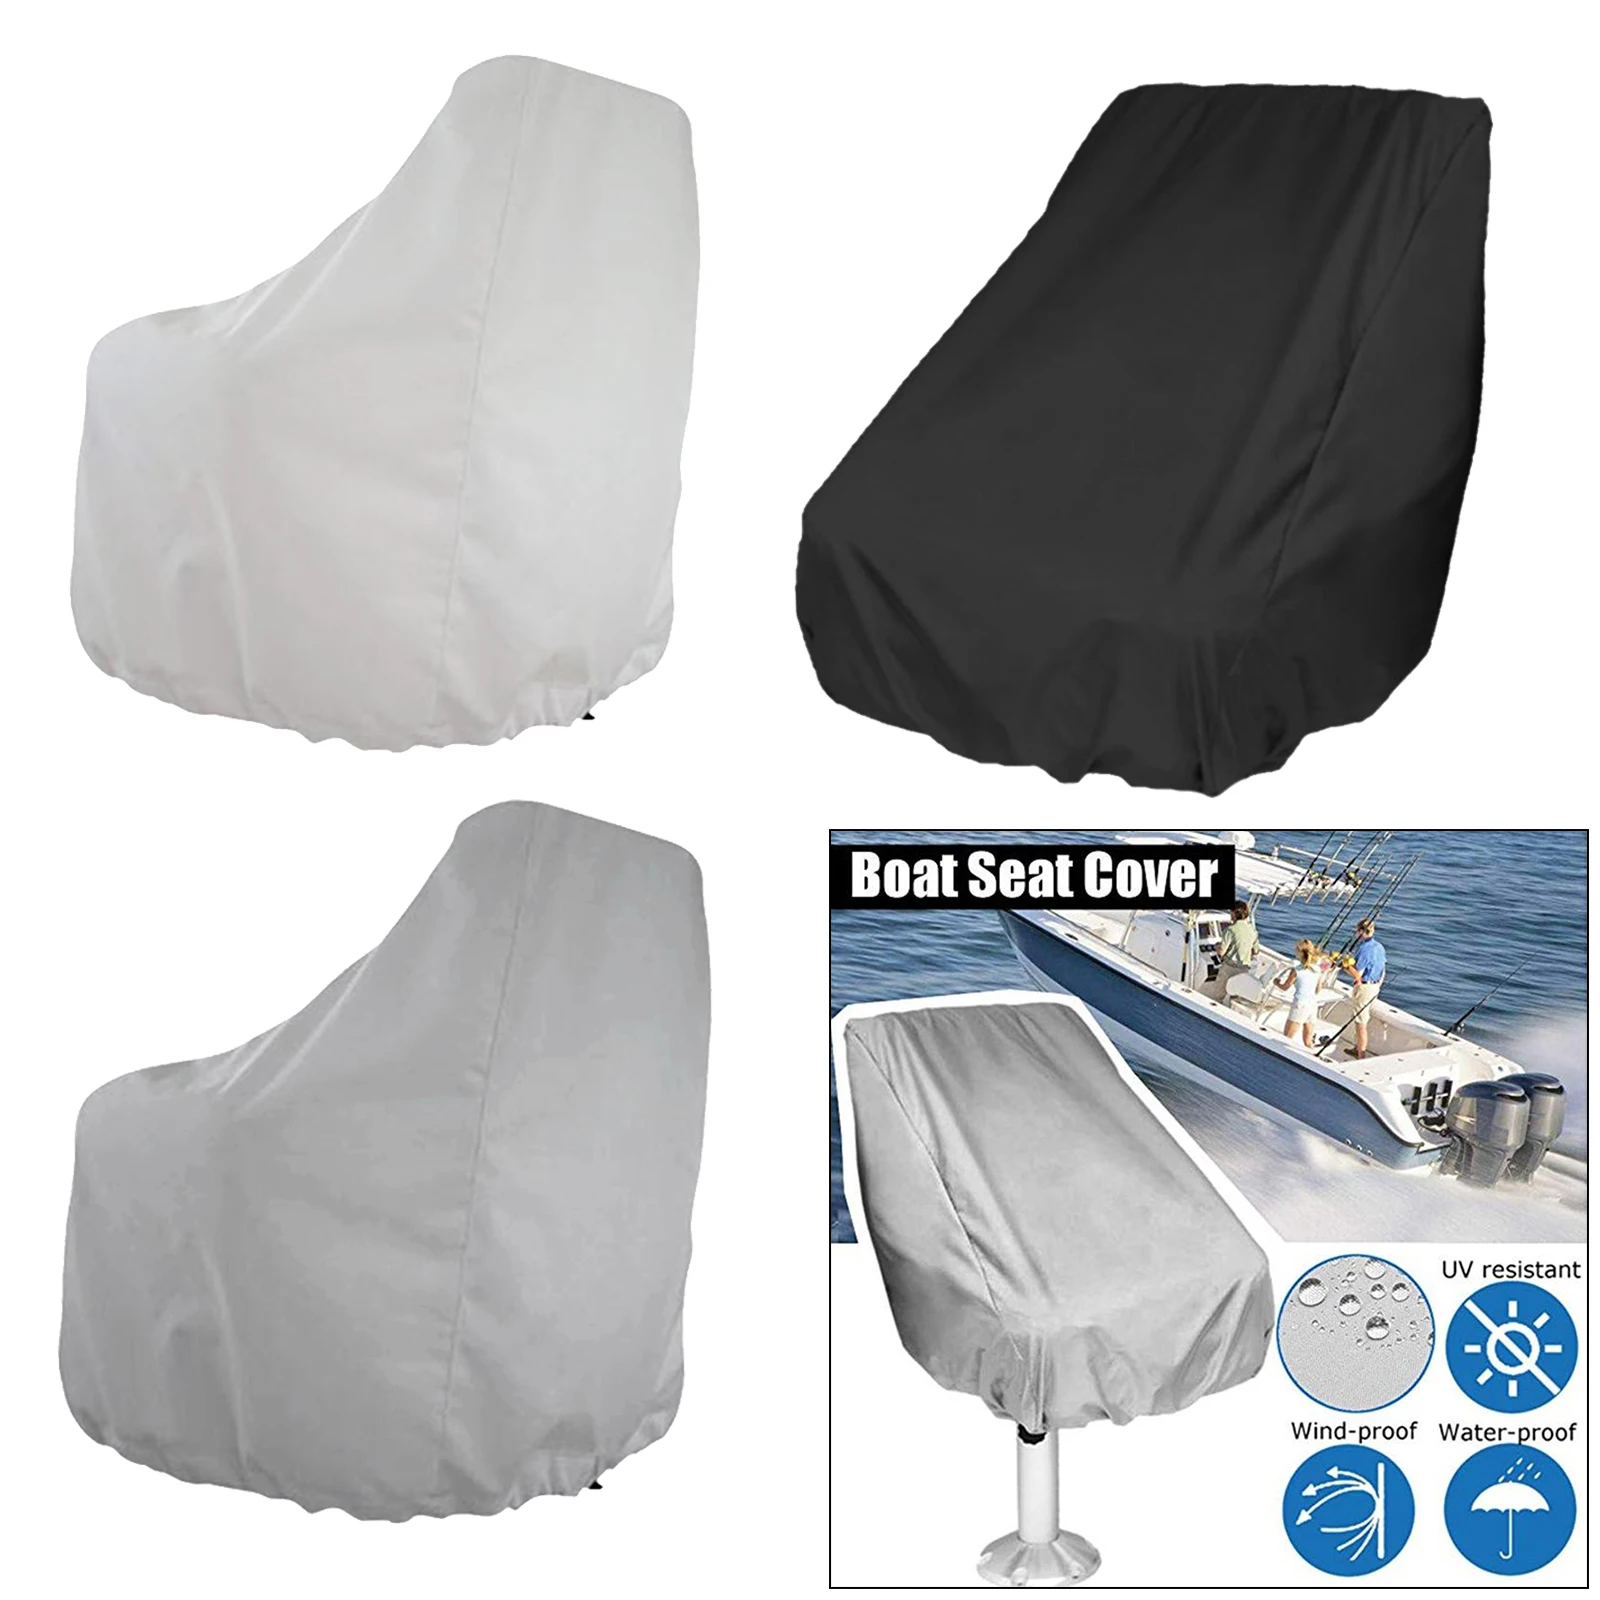 4 Size Boat Cover UV Protection Waterproof Accessories V-Shaped Boat Suit 300D Oxford Cloth PVC Coated Blue Yacht Cover Ping Bu Qing Yun Dust Cover Furniture dust Cover 